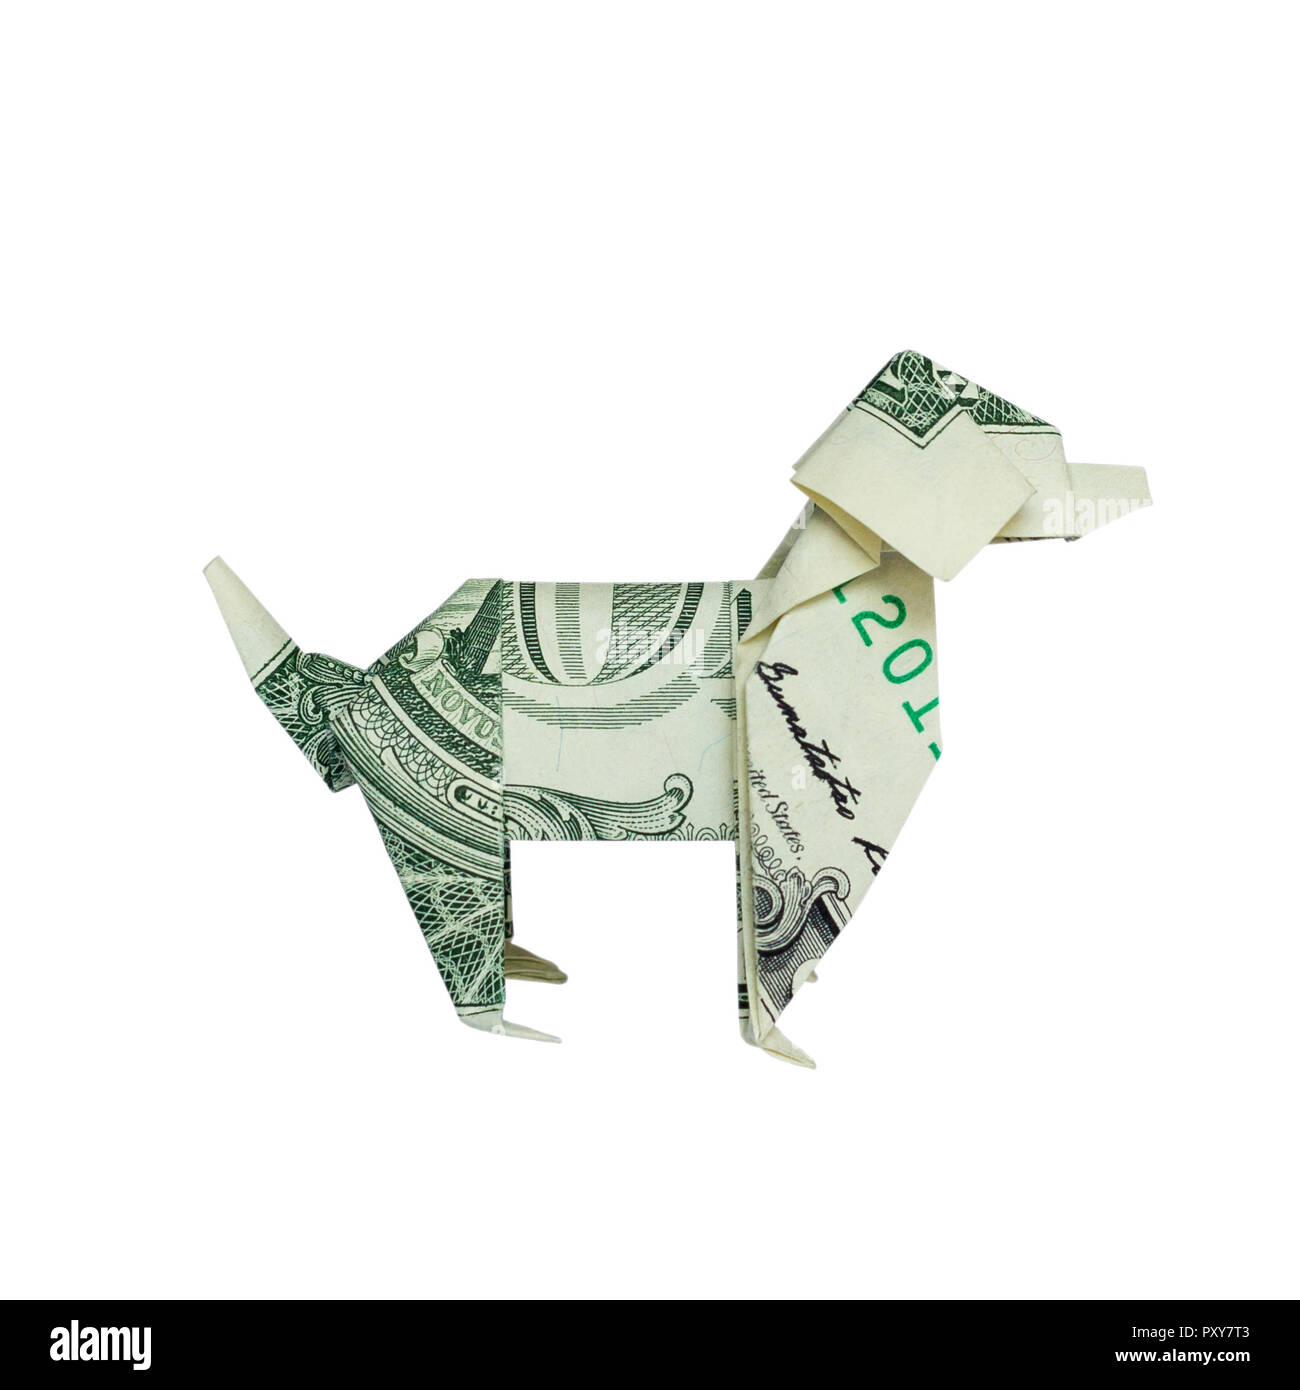 Money Origami Right Side DOG in Profile Folded with Real One Dollar Bill Isolated on White Background Stock Photo